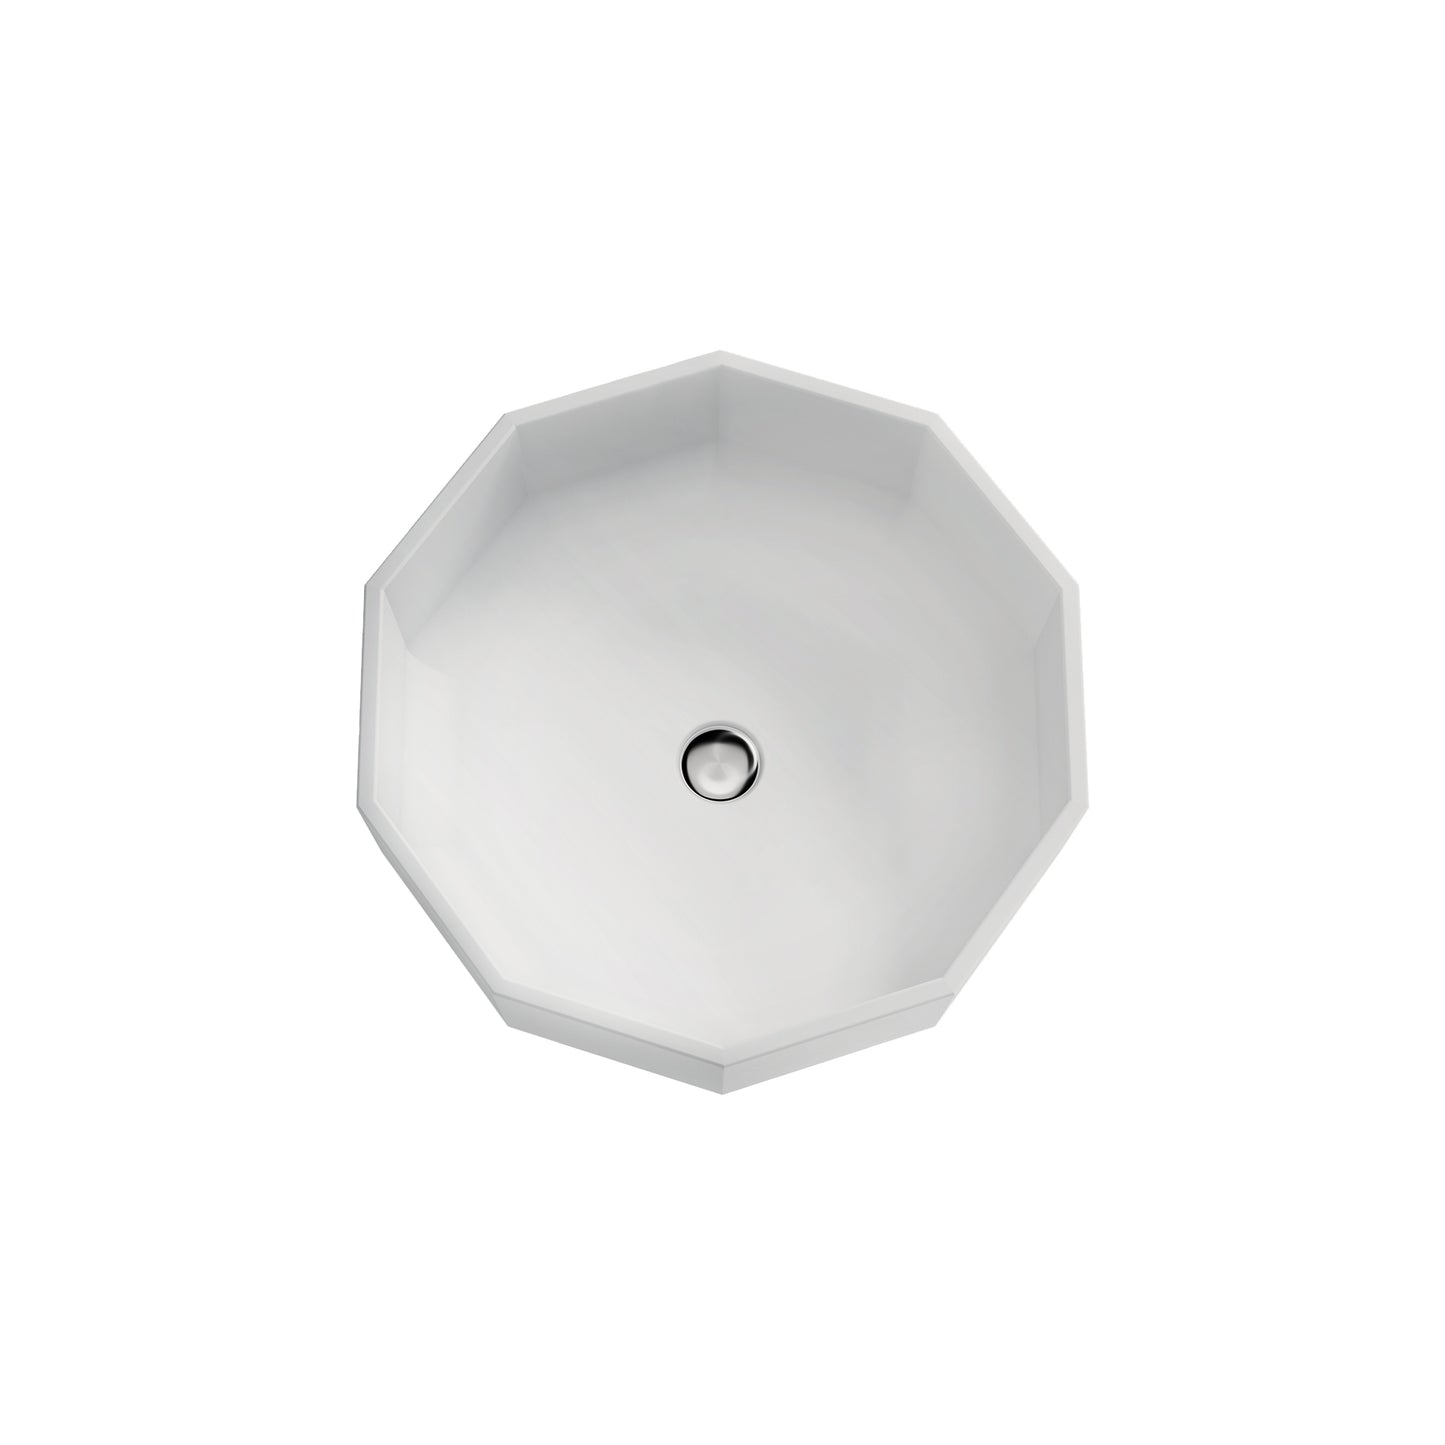 FS515-480 Solid surface basin